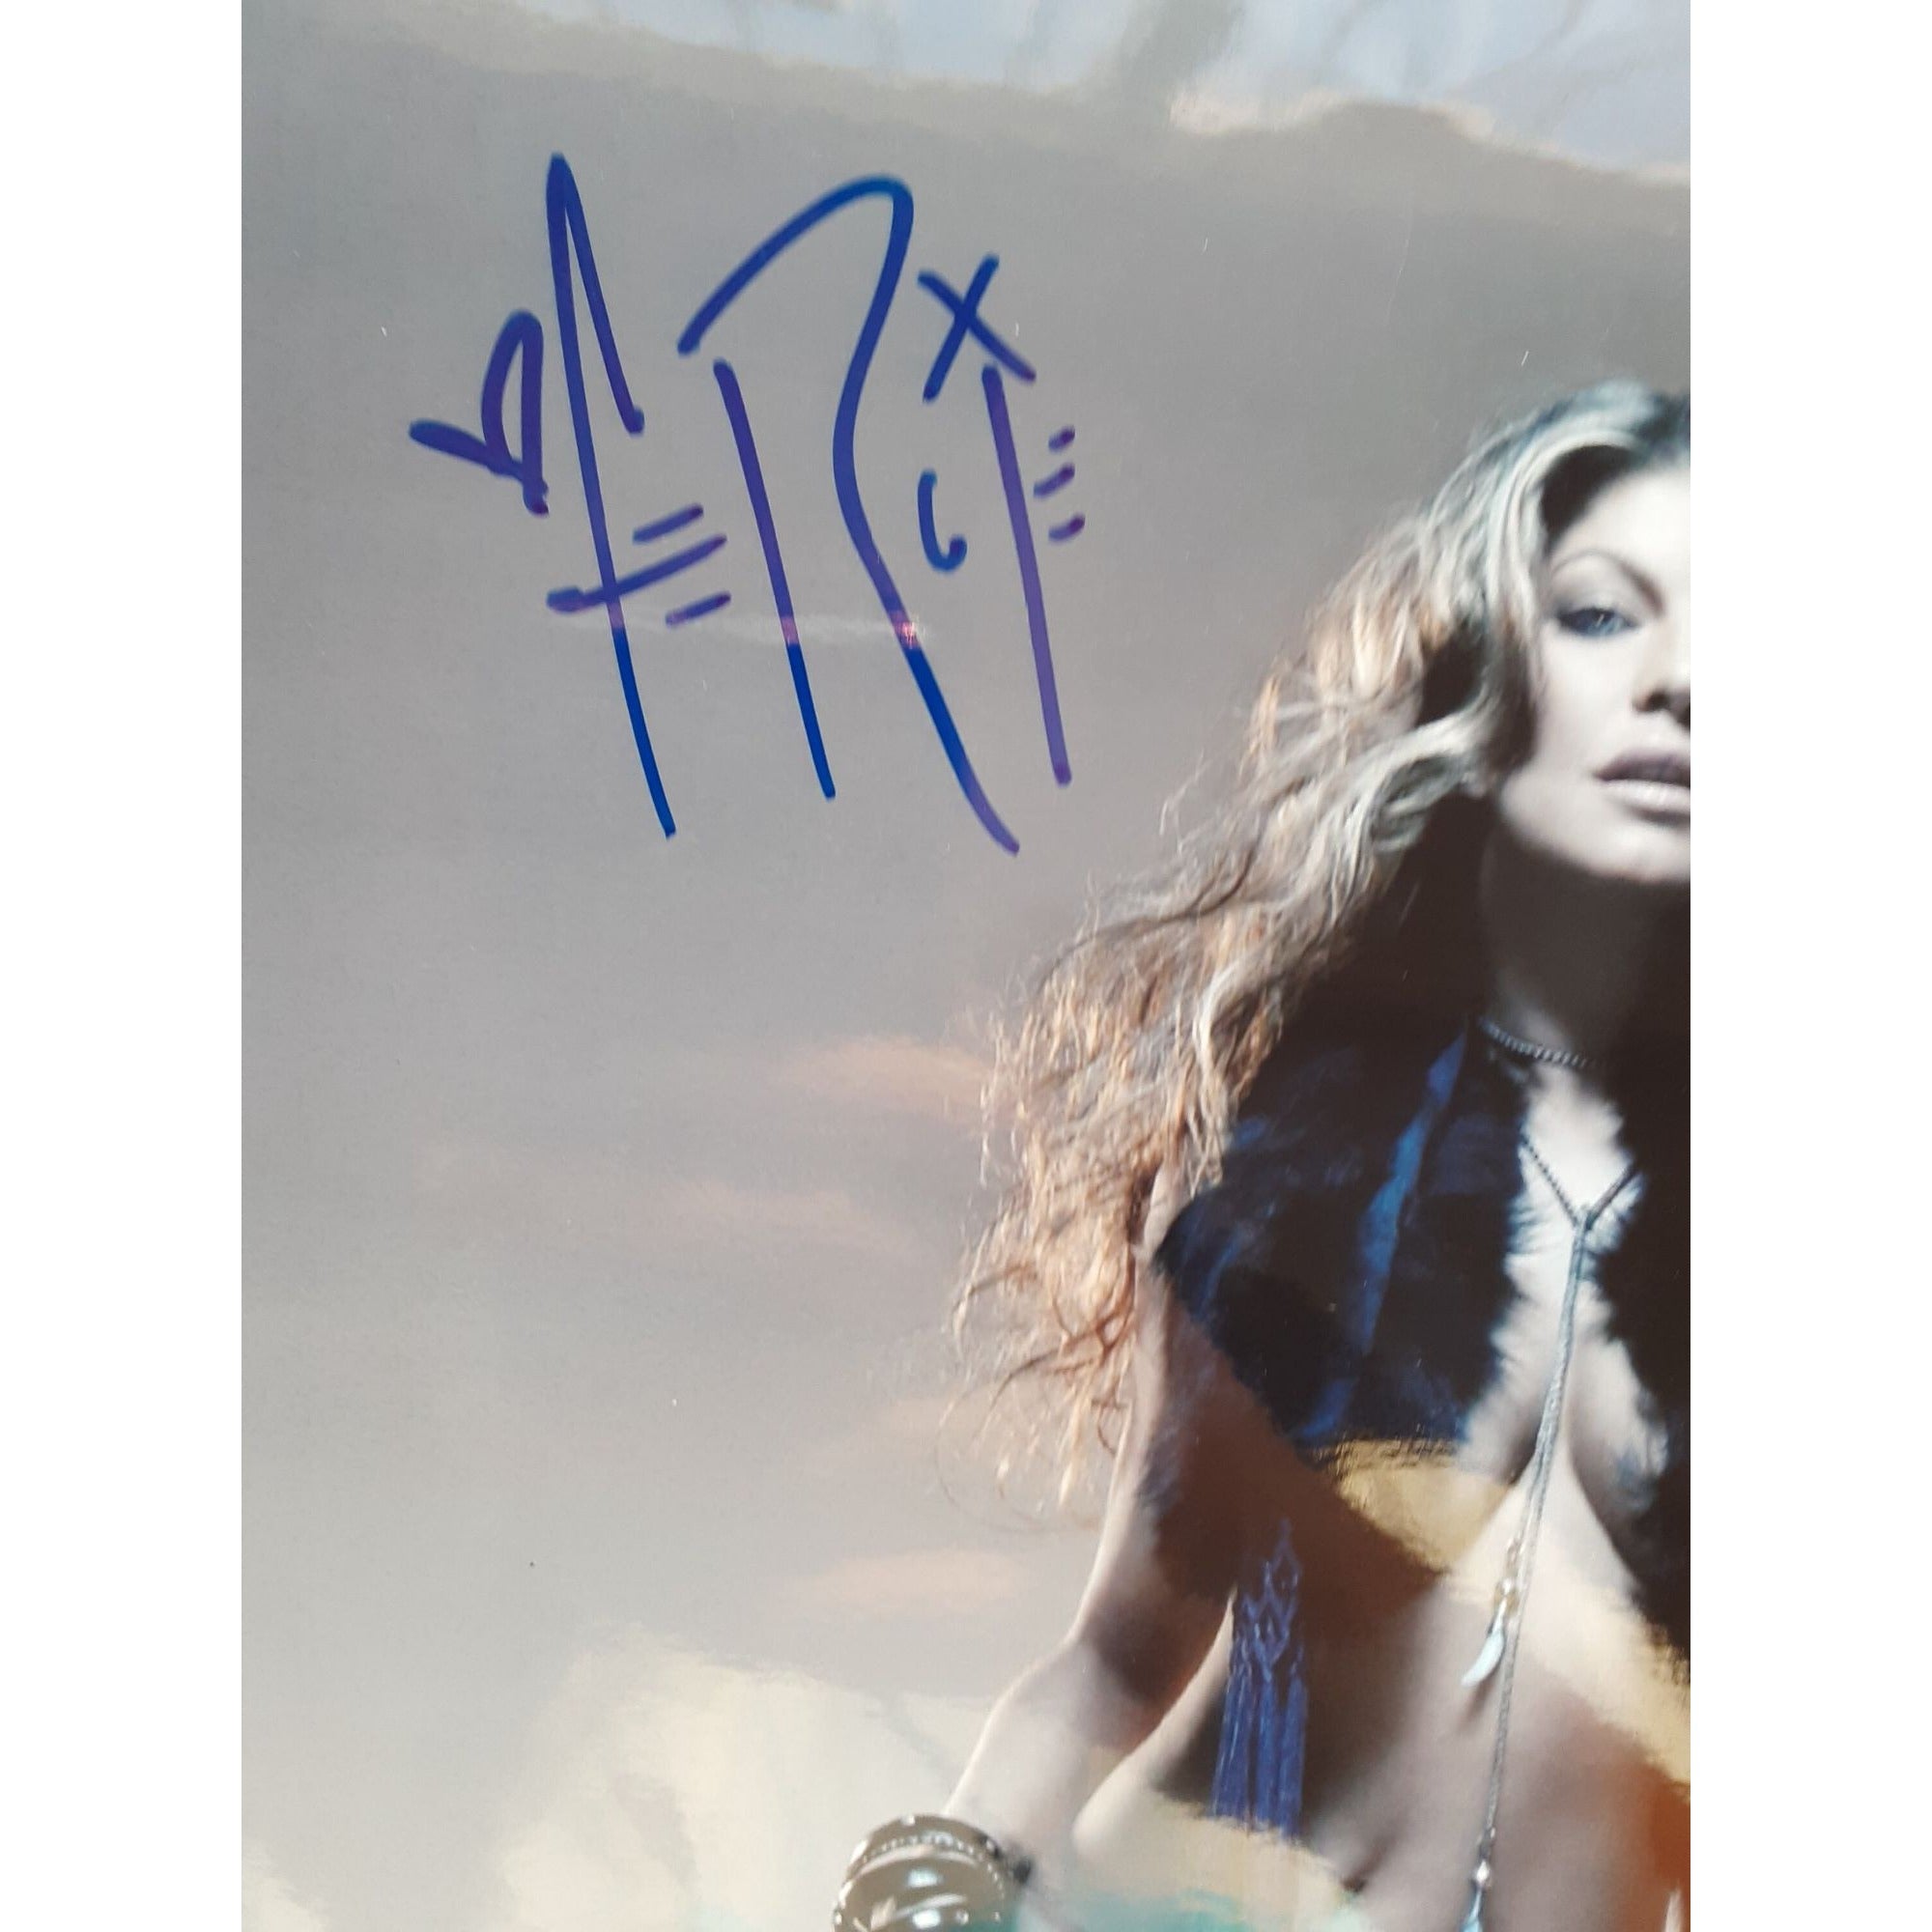 Fergie Black Eyed Peas 8 x 10 sign photo – Awesome Artifacts